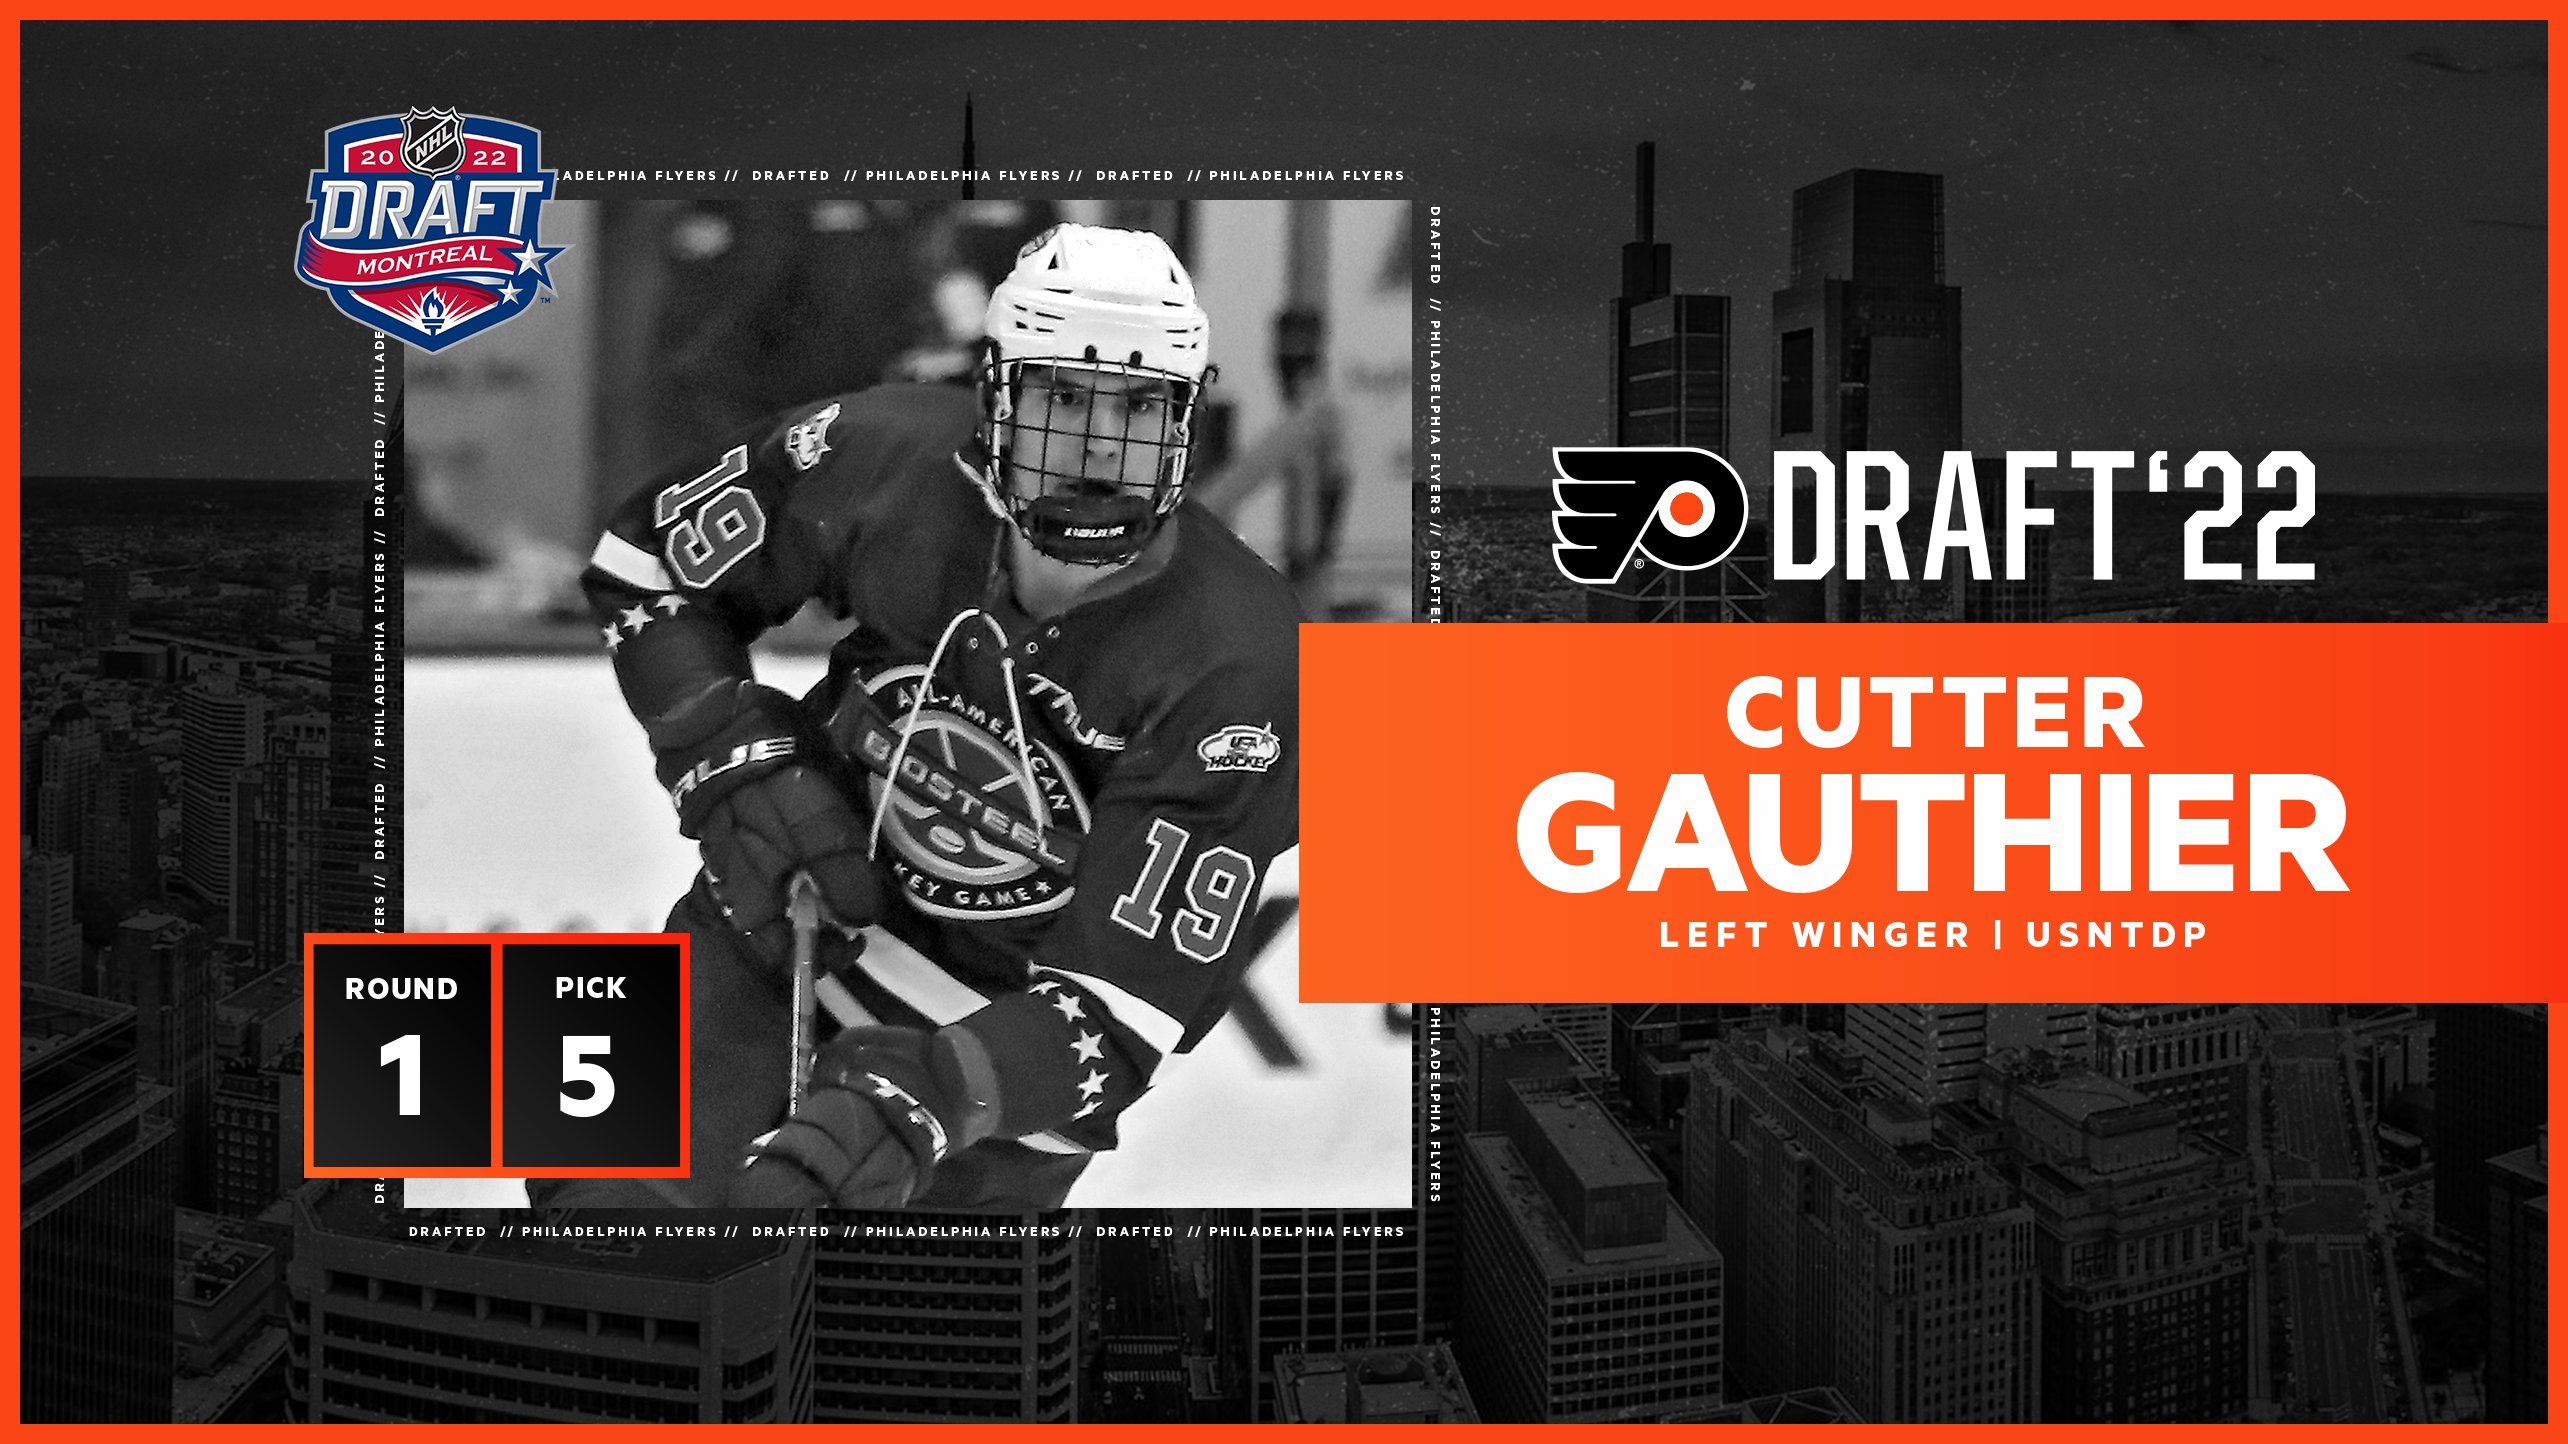 Philadelphia Flyers' Cutter Gauthier is ready to chase national